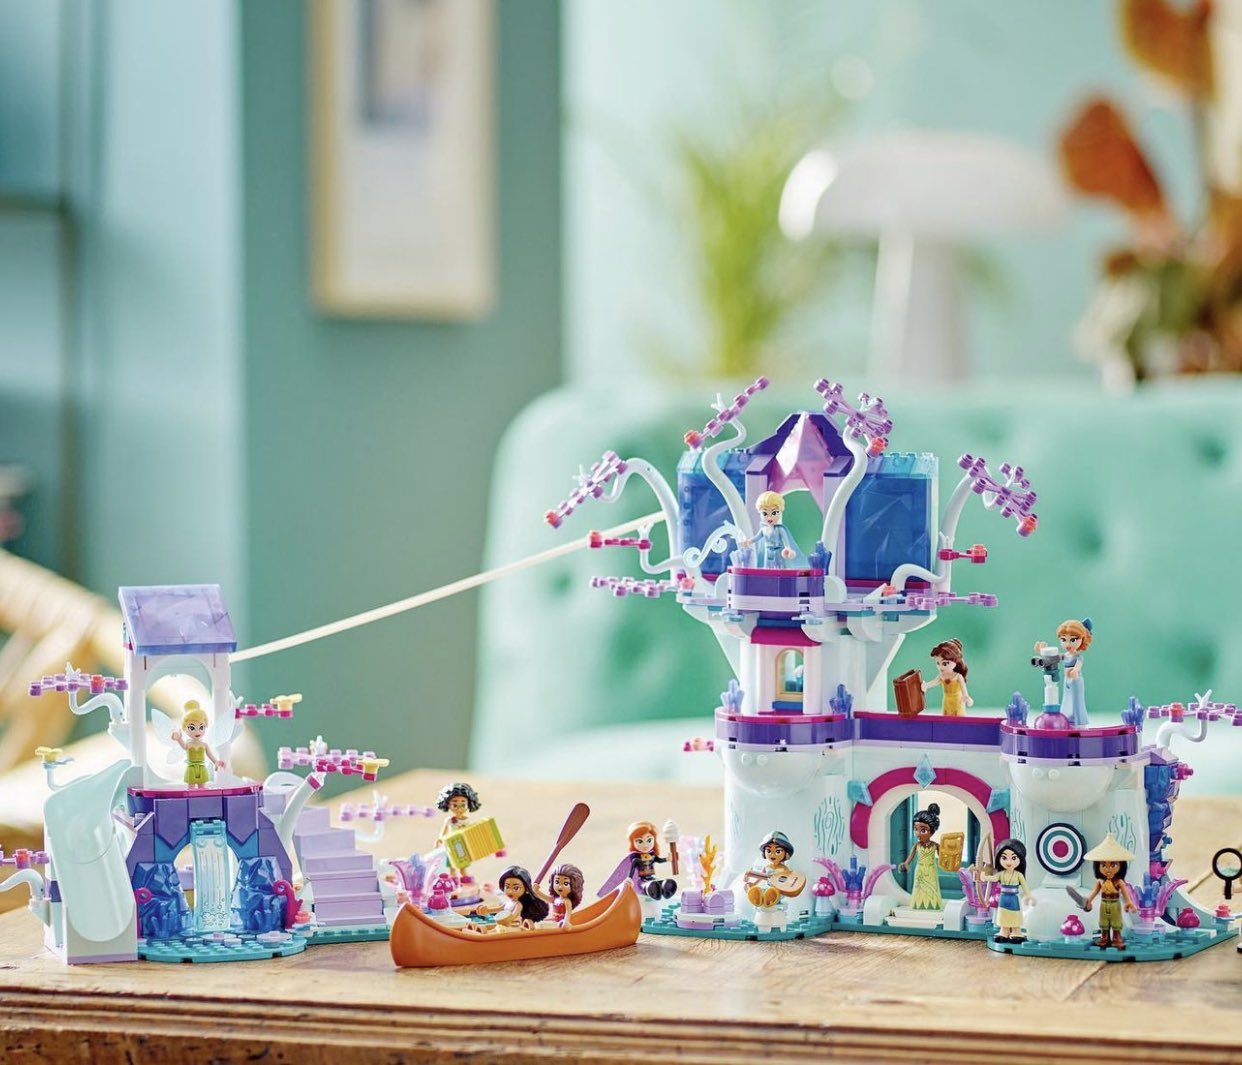 13 Disney Princesses in one set? This is a collector's edition